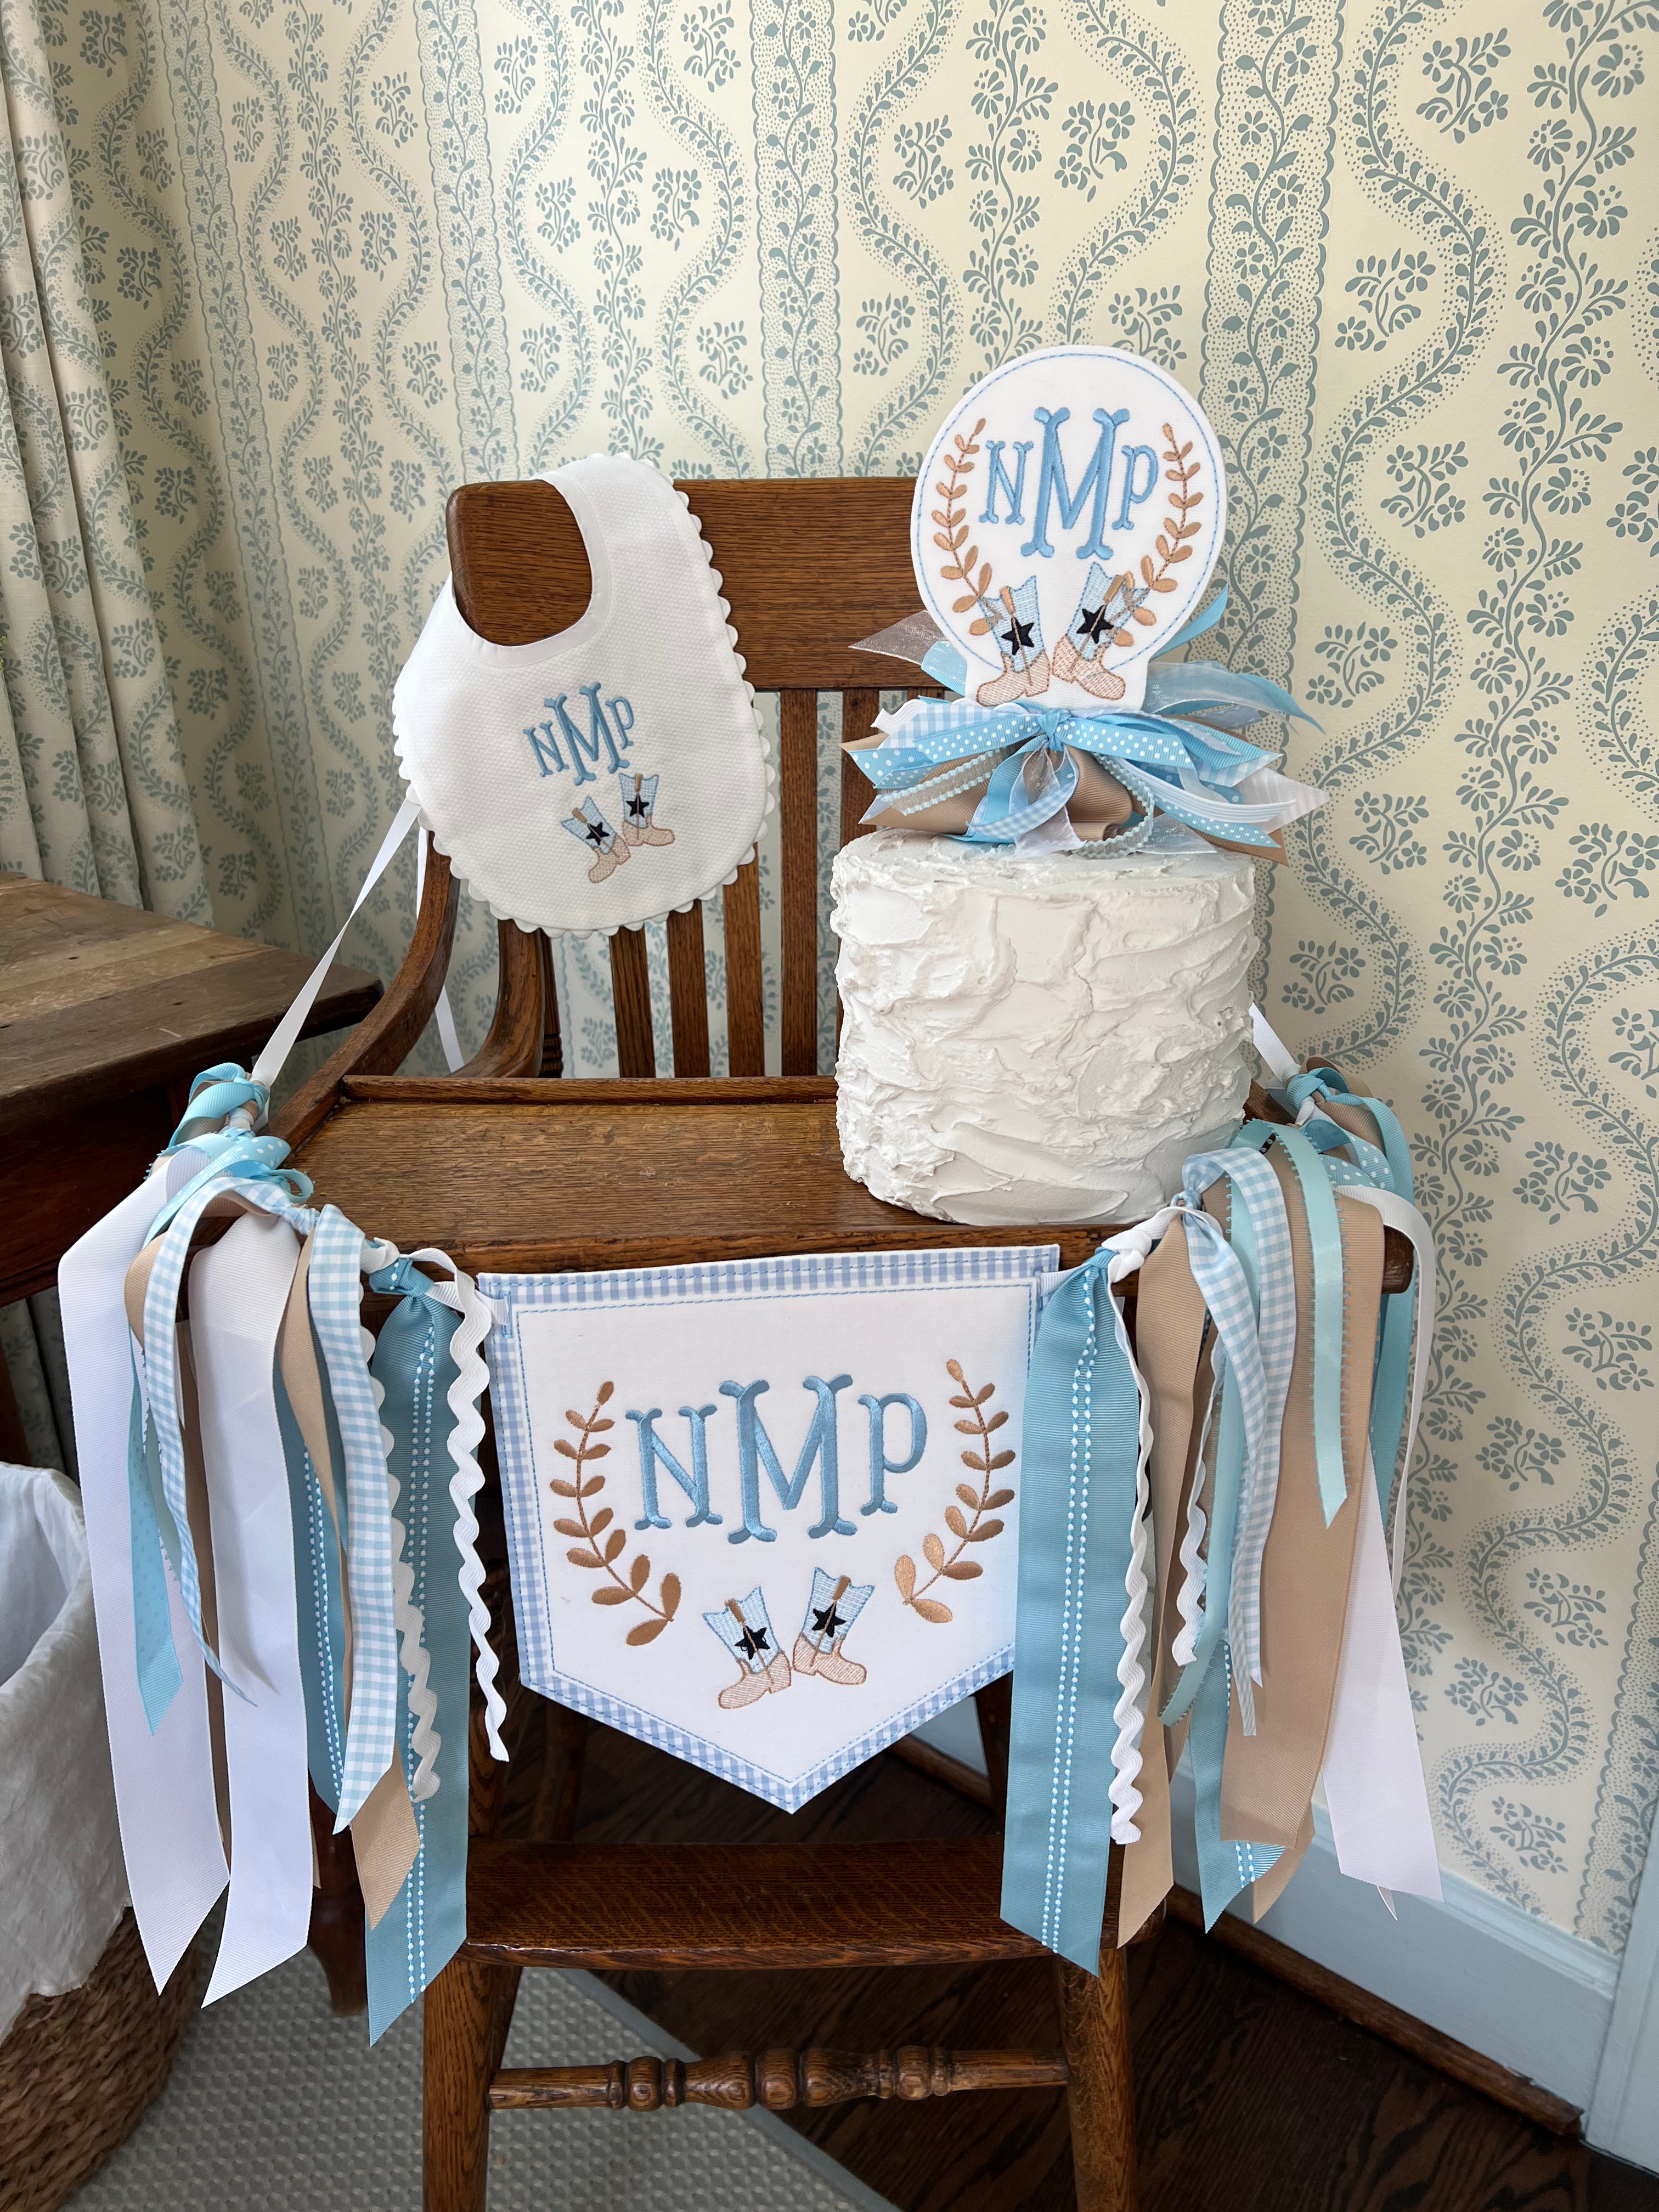 Cowboy Initial Crest Pendant and Cake Topper